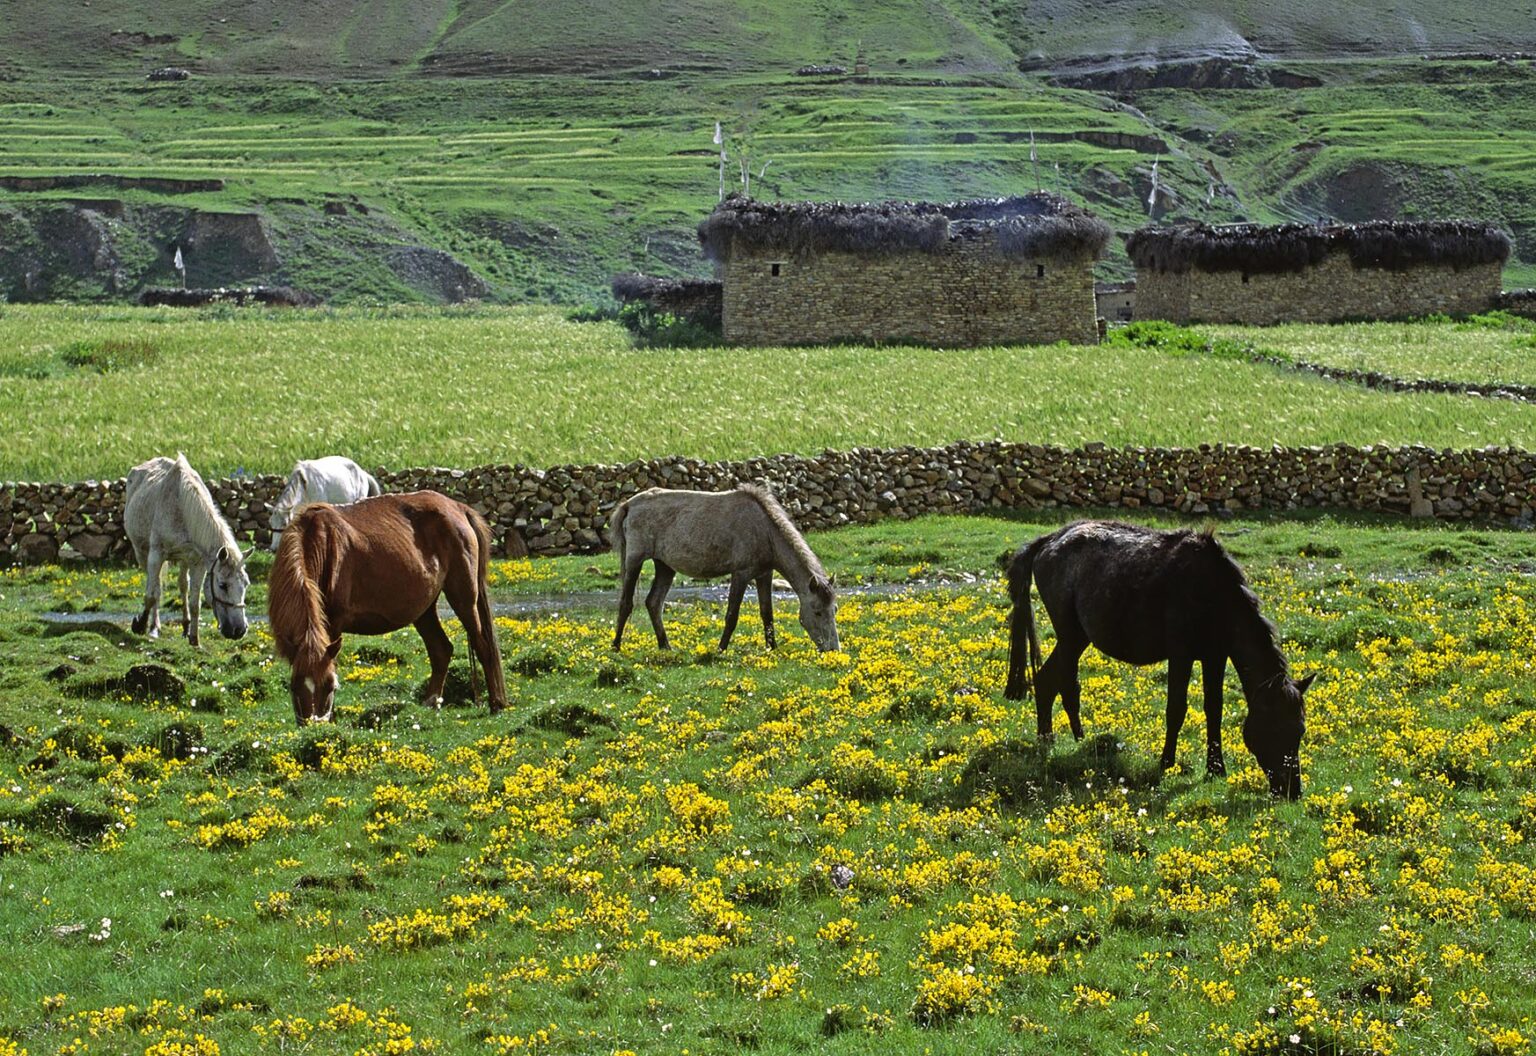 HORSES GRAZE in fields filled with wildflowers next to a stream and BARLEY FIELDS in the DO TARAP VALLEY - DOLPO DISTRICT, NEPAL